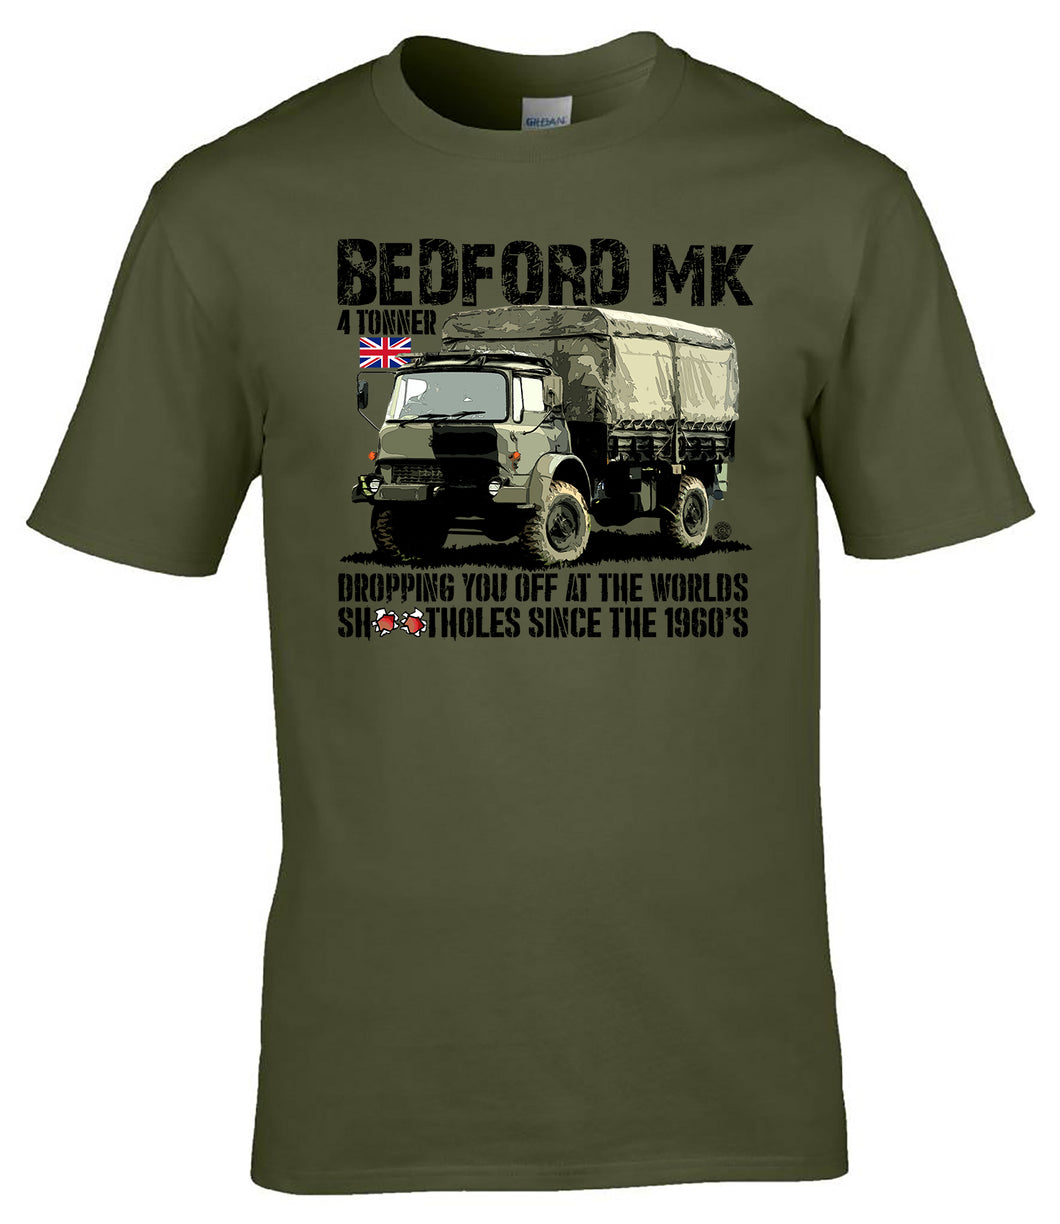 Military Humor - Bedford - 4 Tonner - Taxi